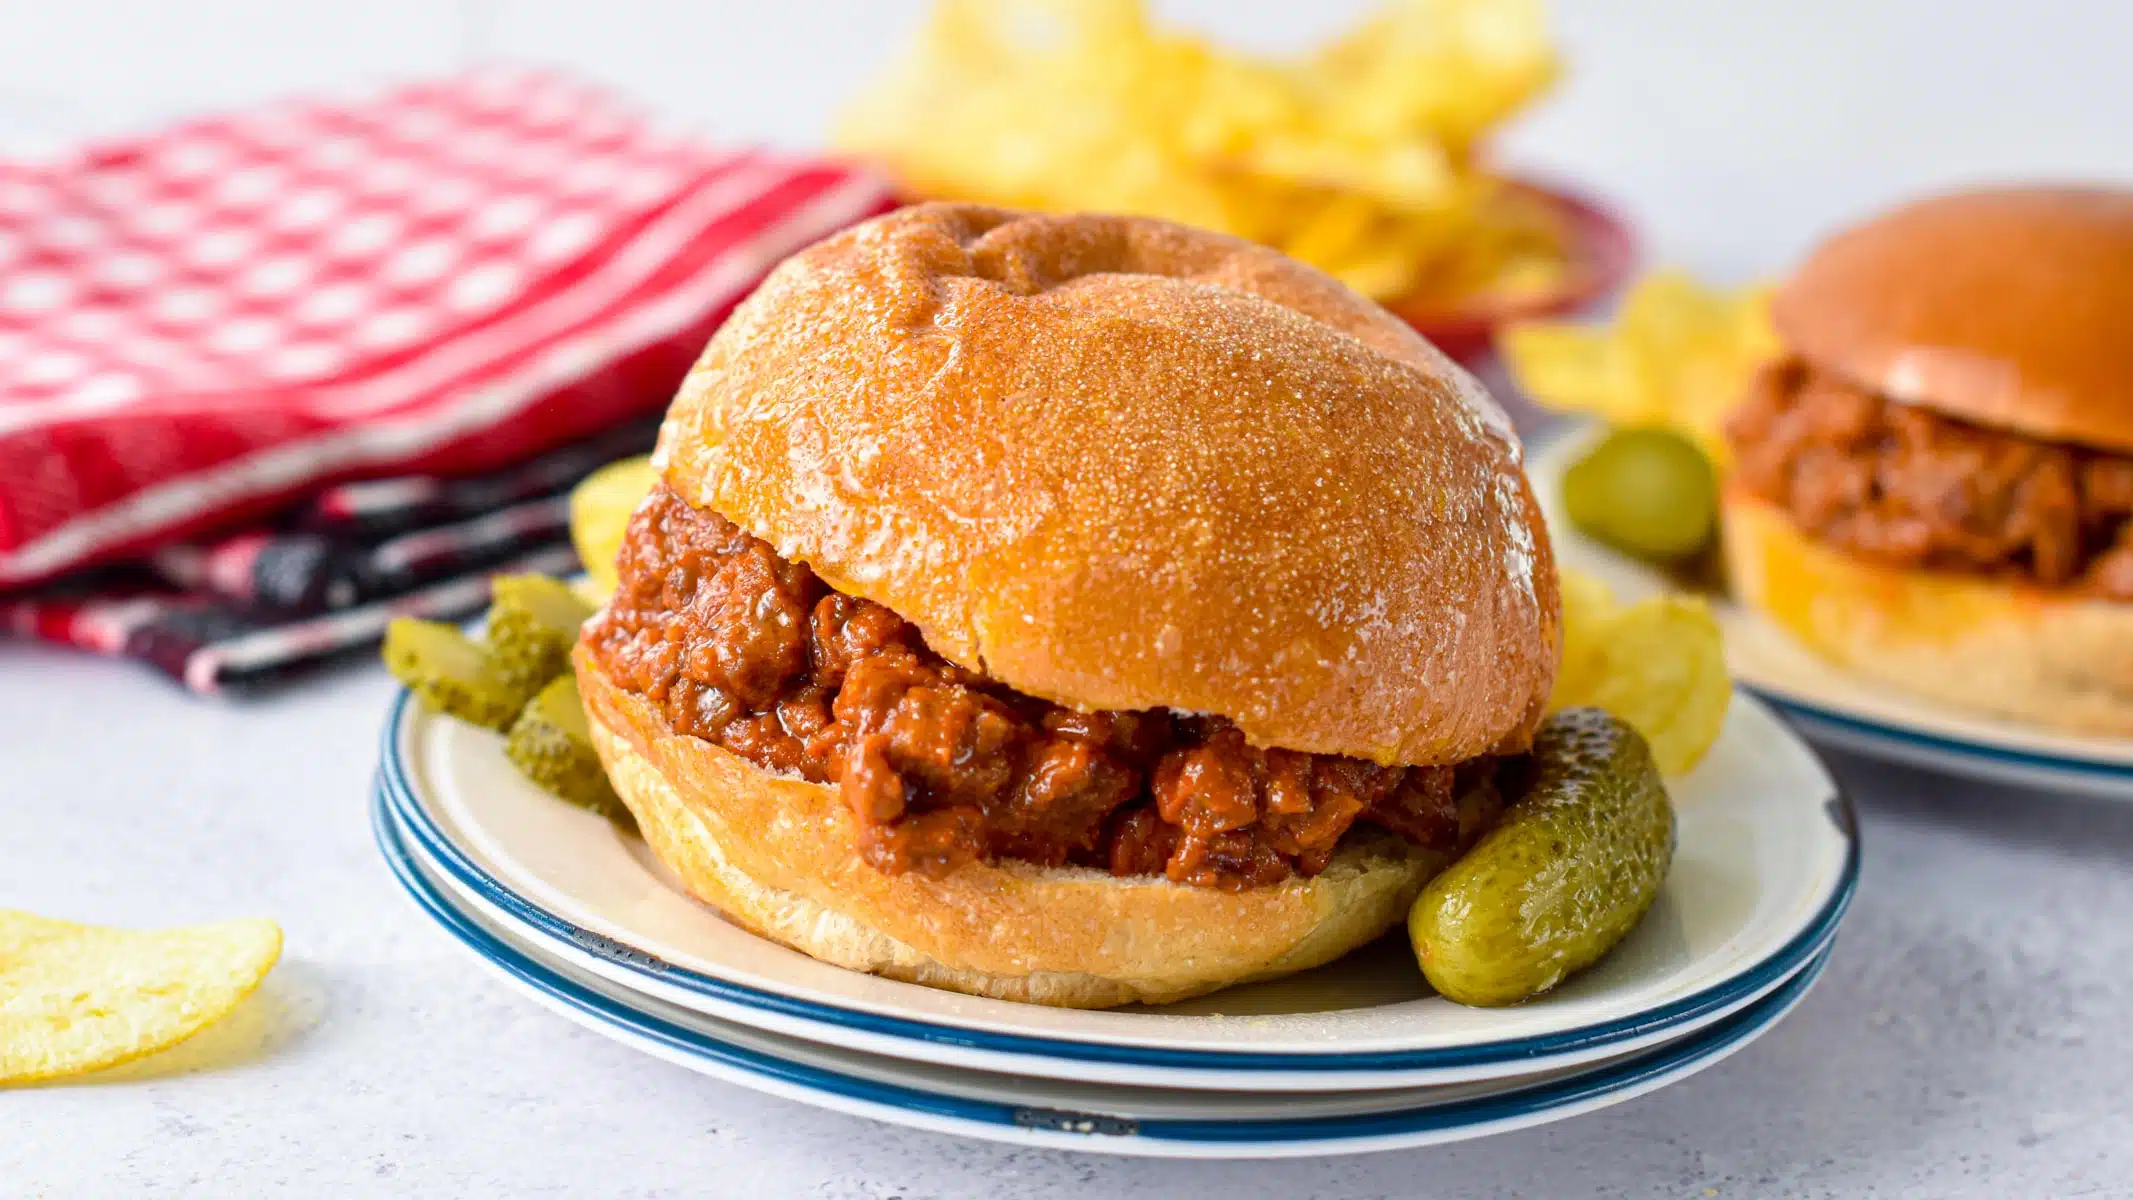 This Easy Sloppy Joe Recipe 3 ingredients is my go to dinner on busy days. Plus, the kids love this easy recipe and it's perfect to feed a crowd in no time.